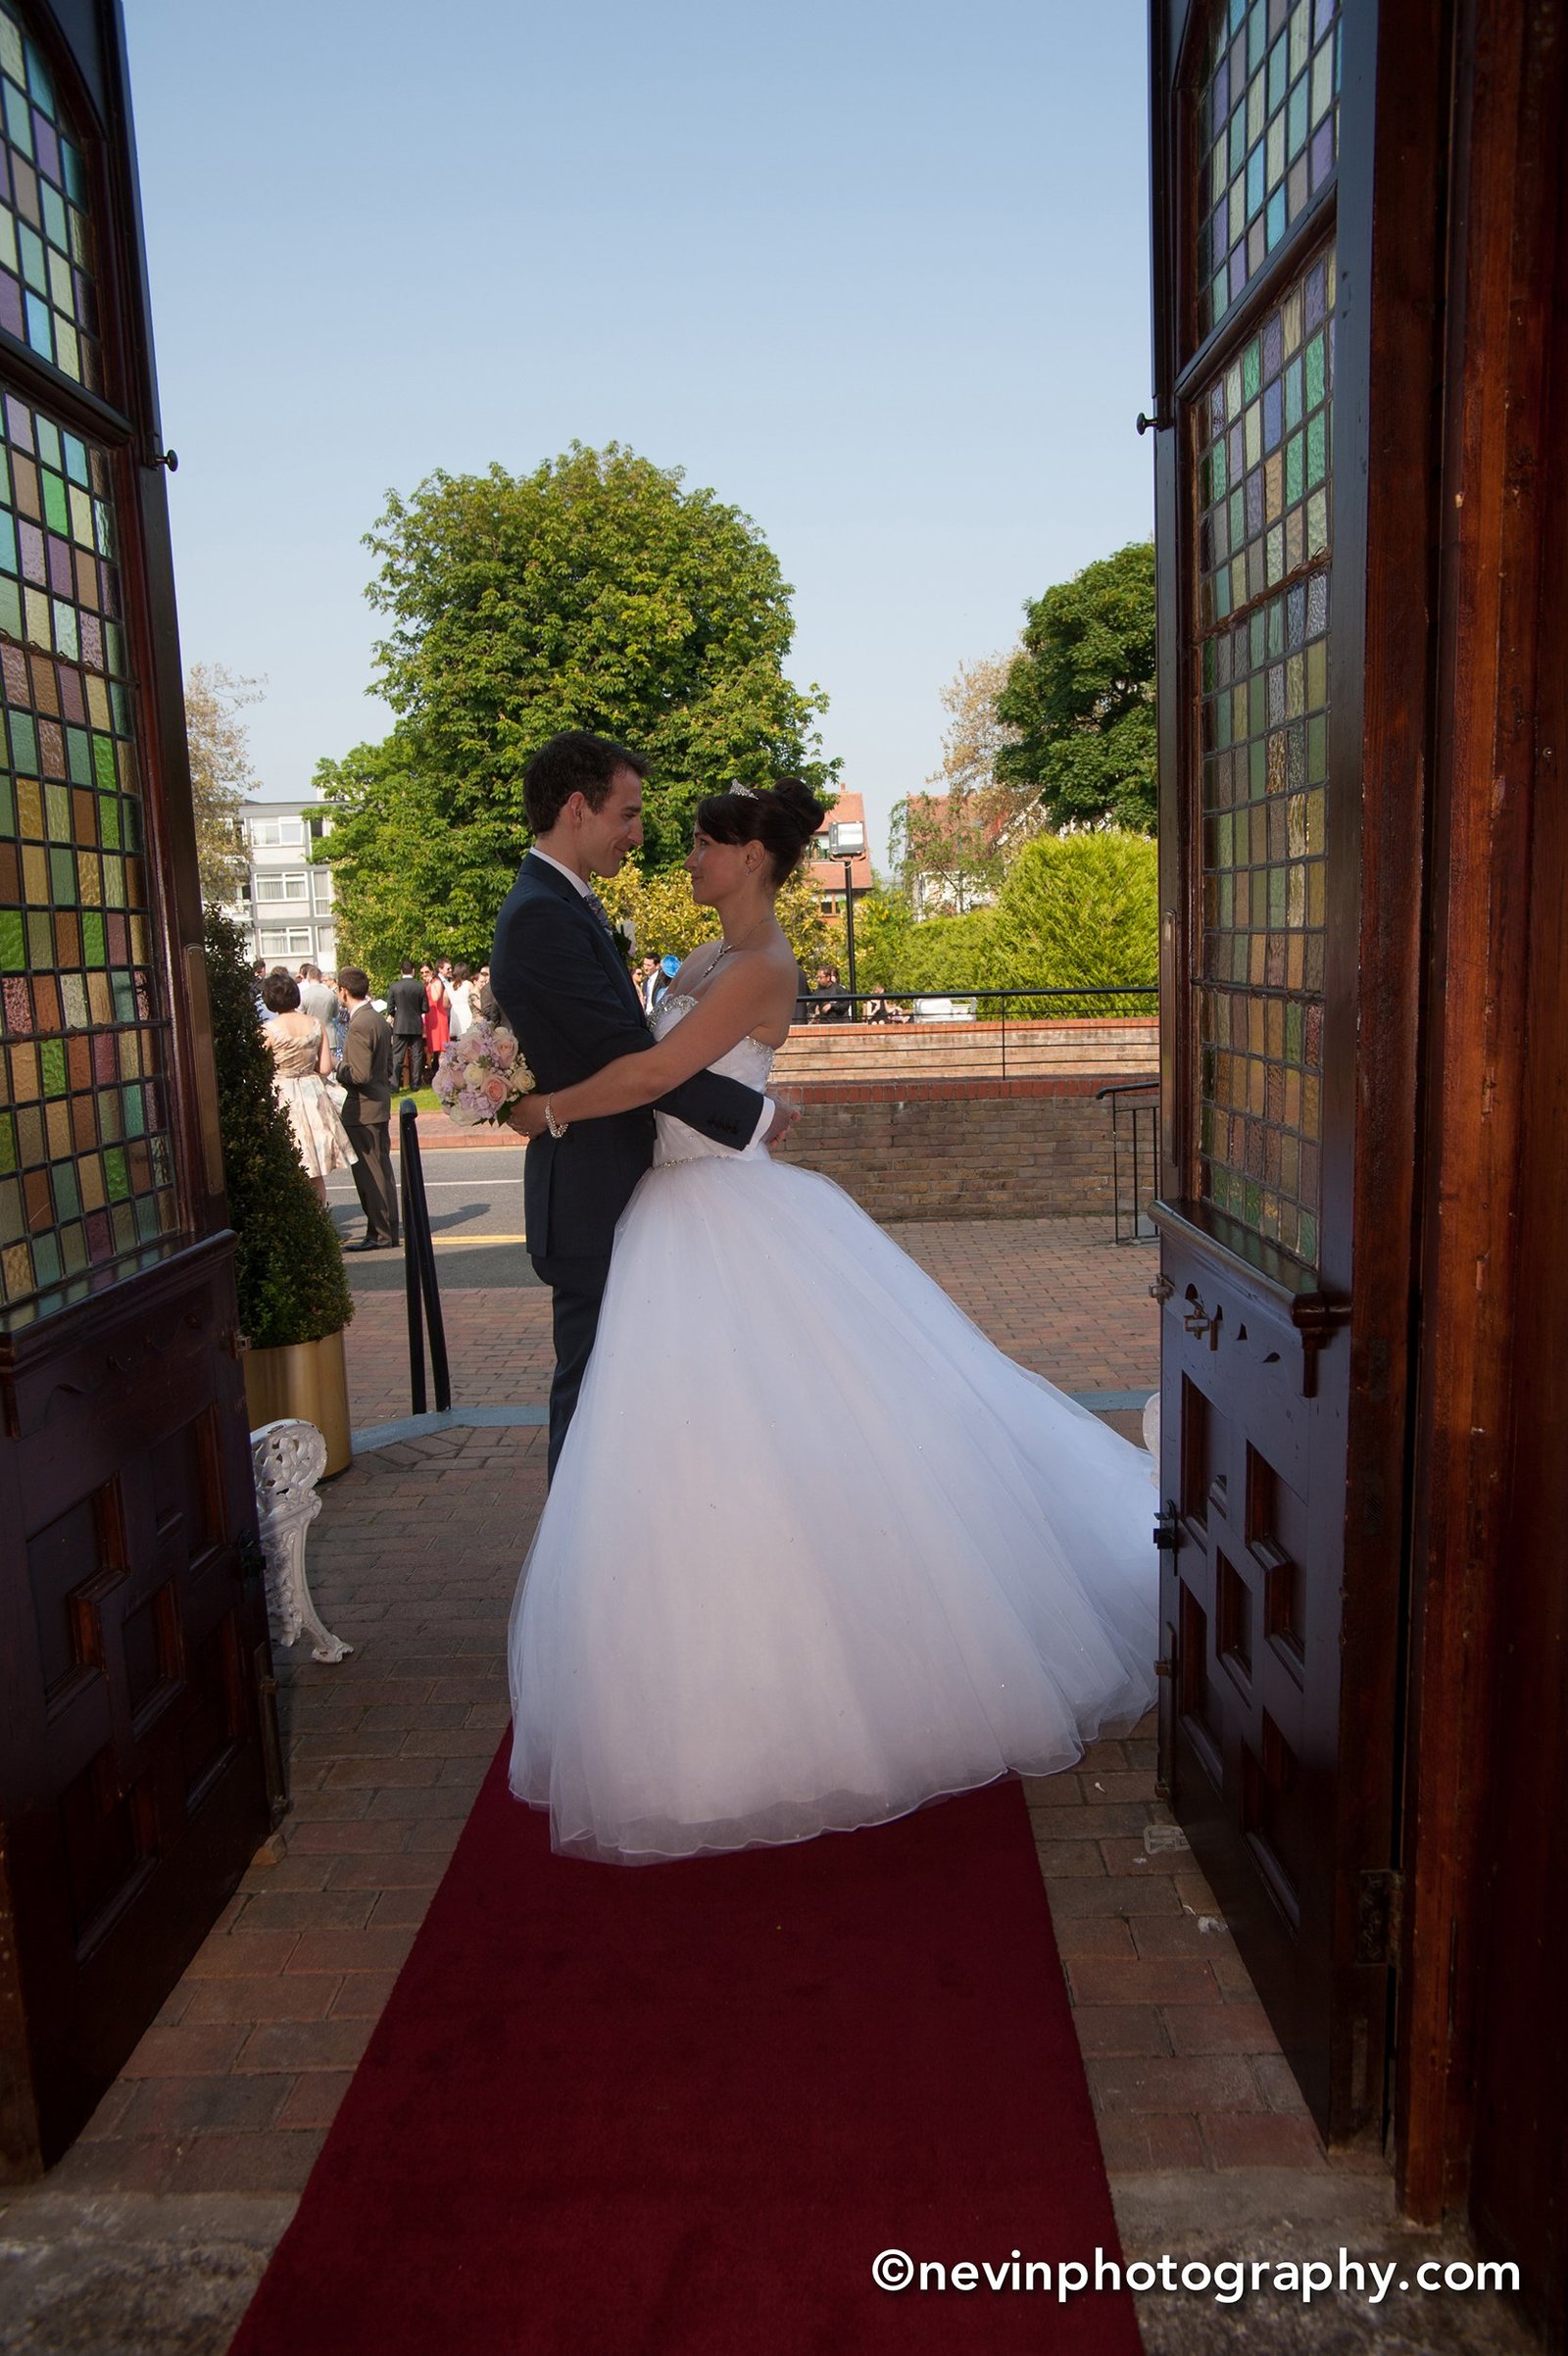 Bride and groom embrace at Thomas Prior Hall